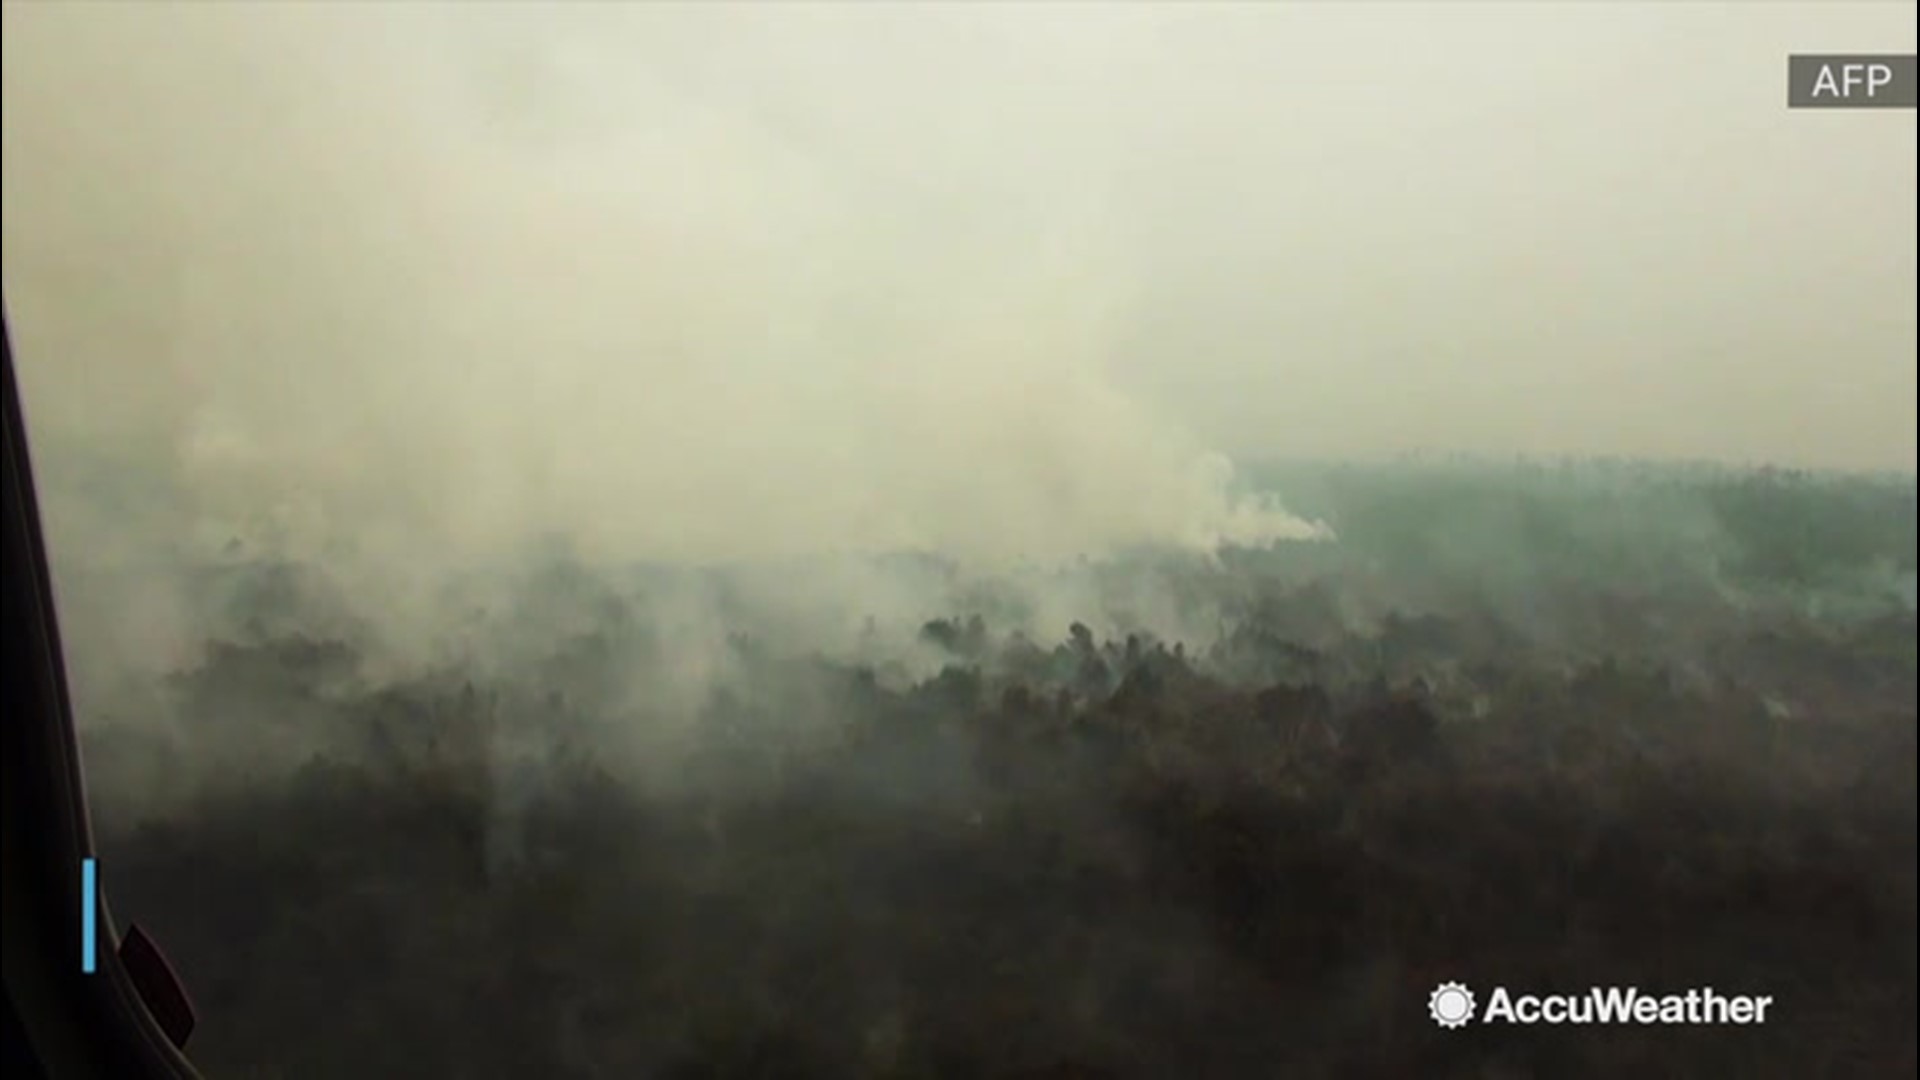 As forest fires continue to rage across parts of Indonesia, President Joko Widodo has ordered 6,000 troops to help battle the blazes. The fires were started by people clearing land for farming. Smog and toxic haze from the wildfires has drifted across the region, making places like Kuala Lumpur, Malaysia, unrecognizable at times, as smog settles into the skyline.